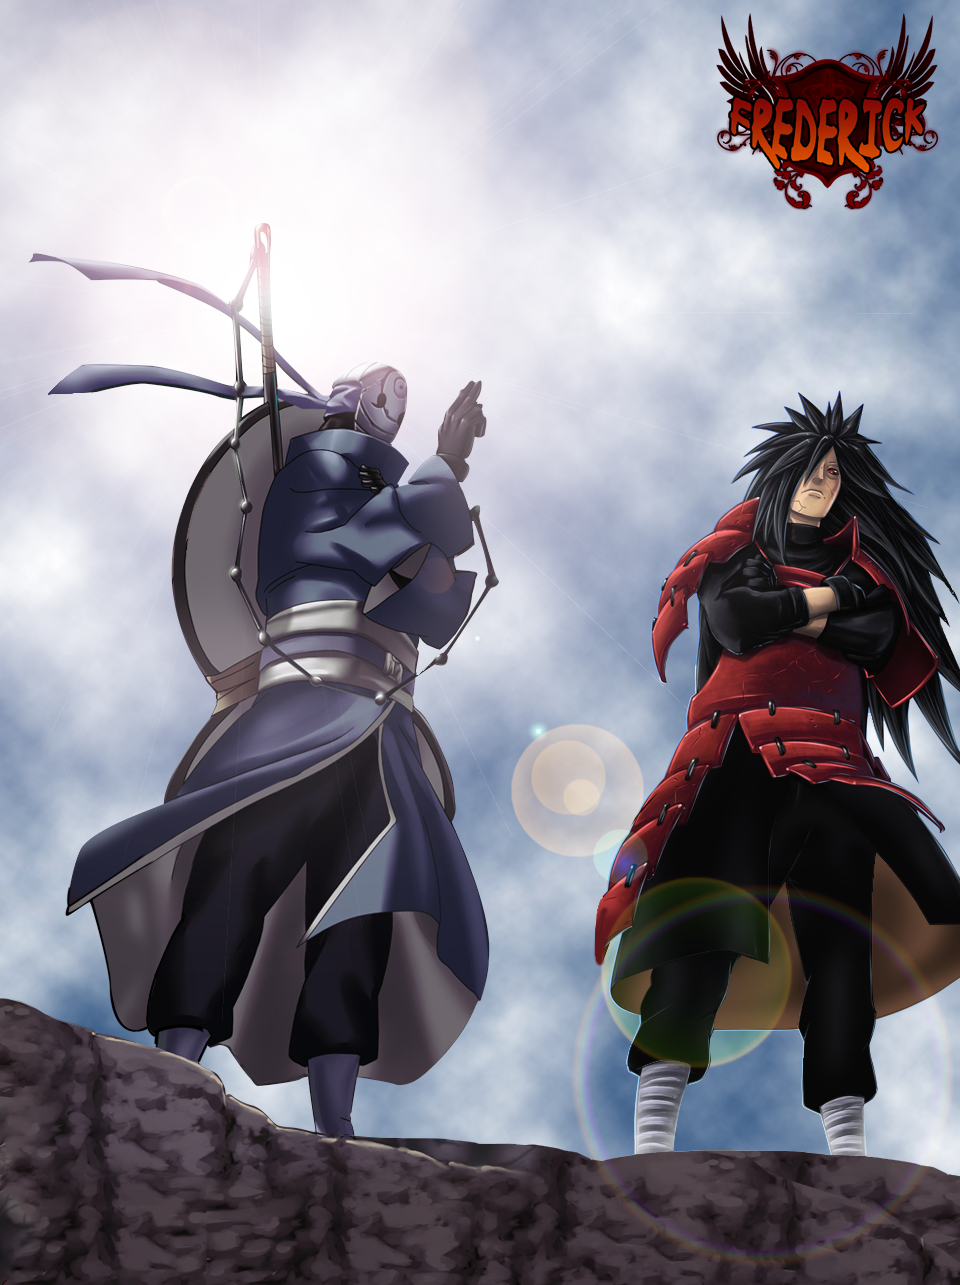 tobi_and_madara__colored__by_fredericknb-d4cx8g3.png